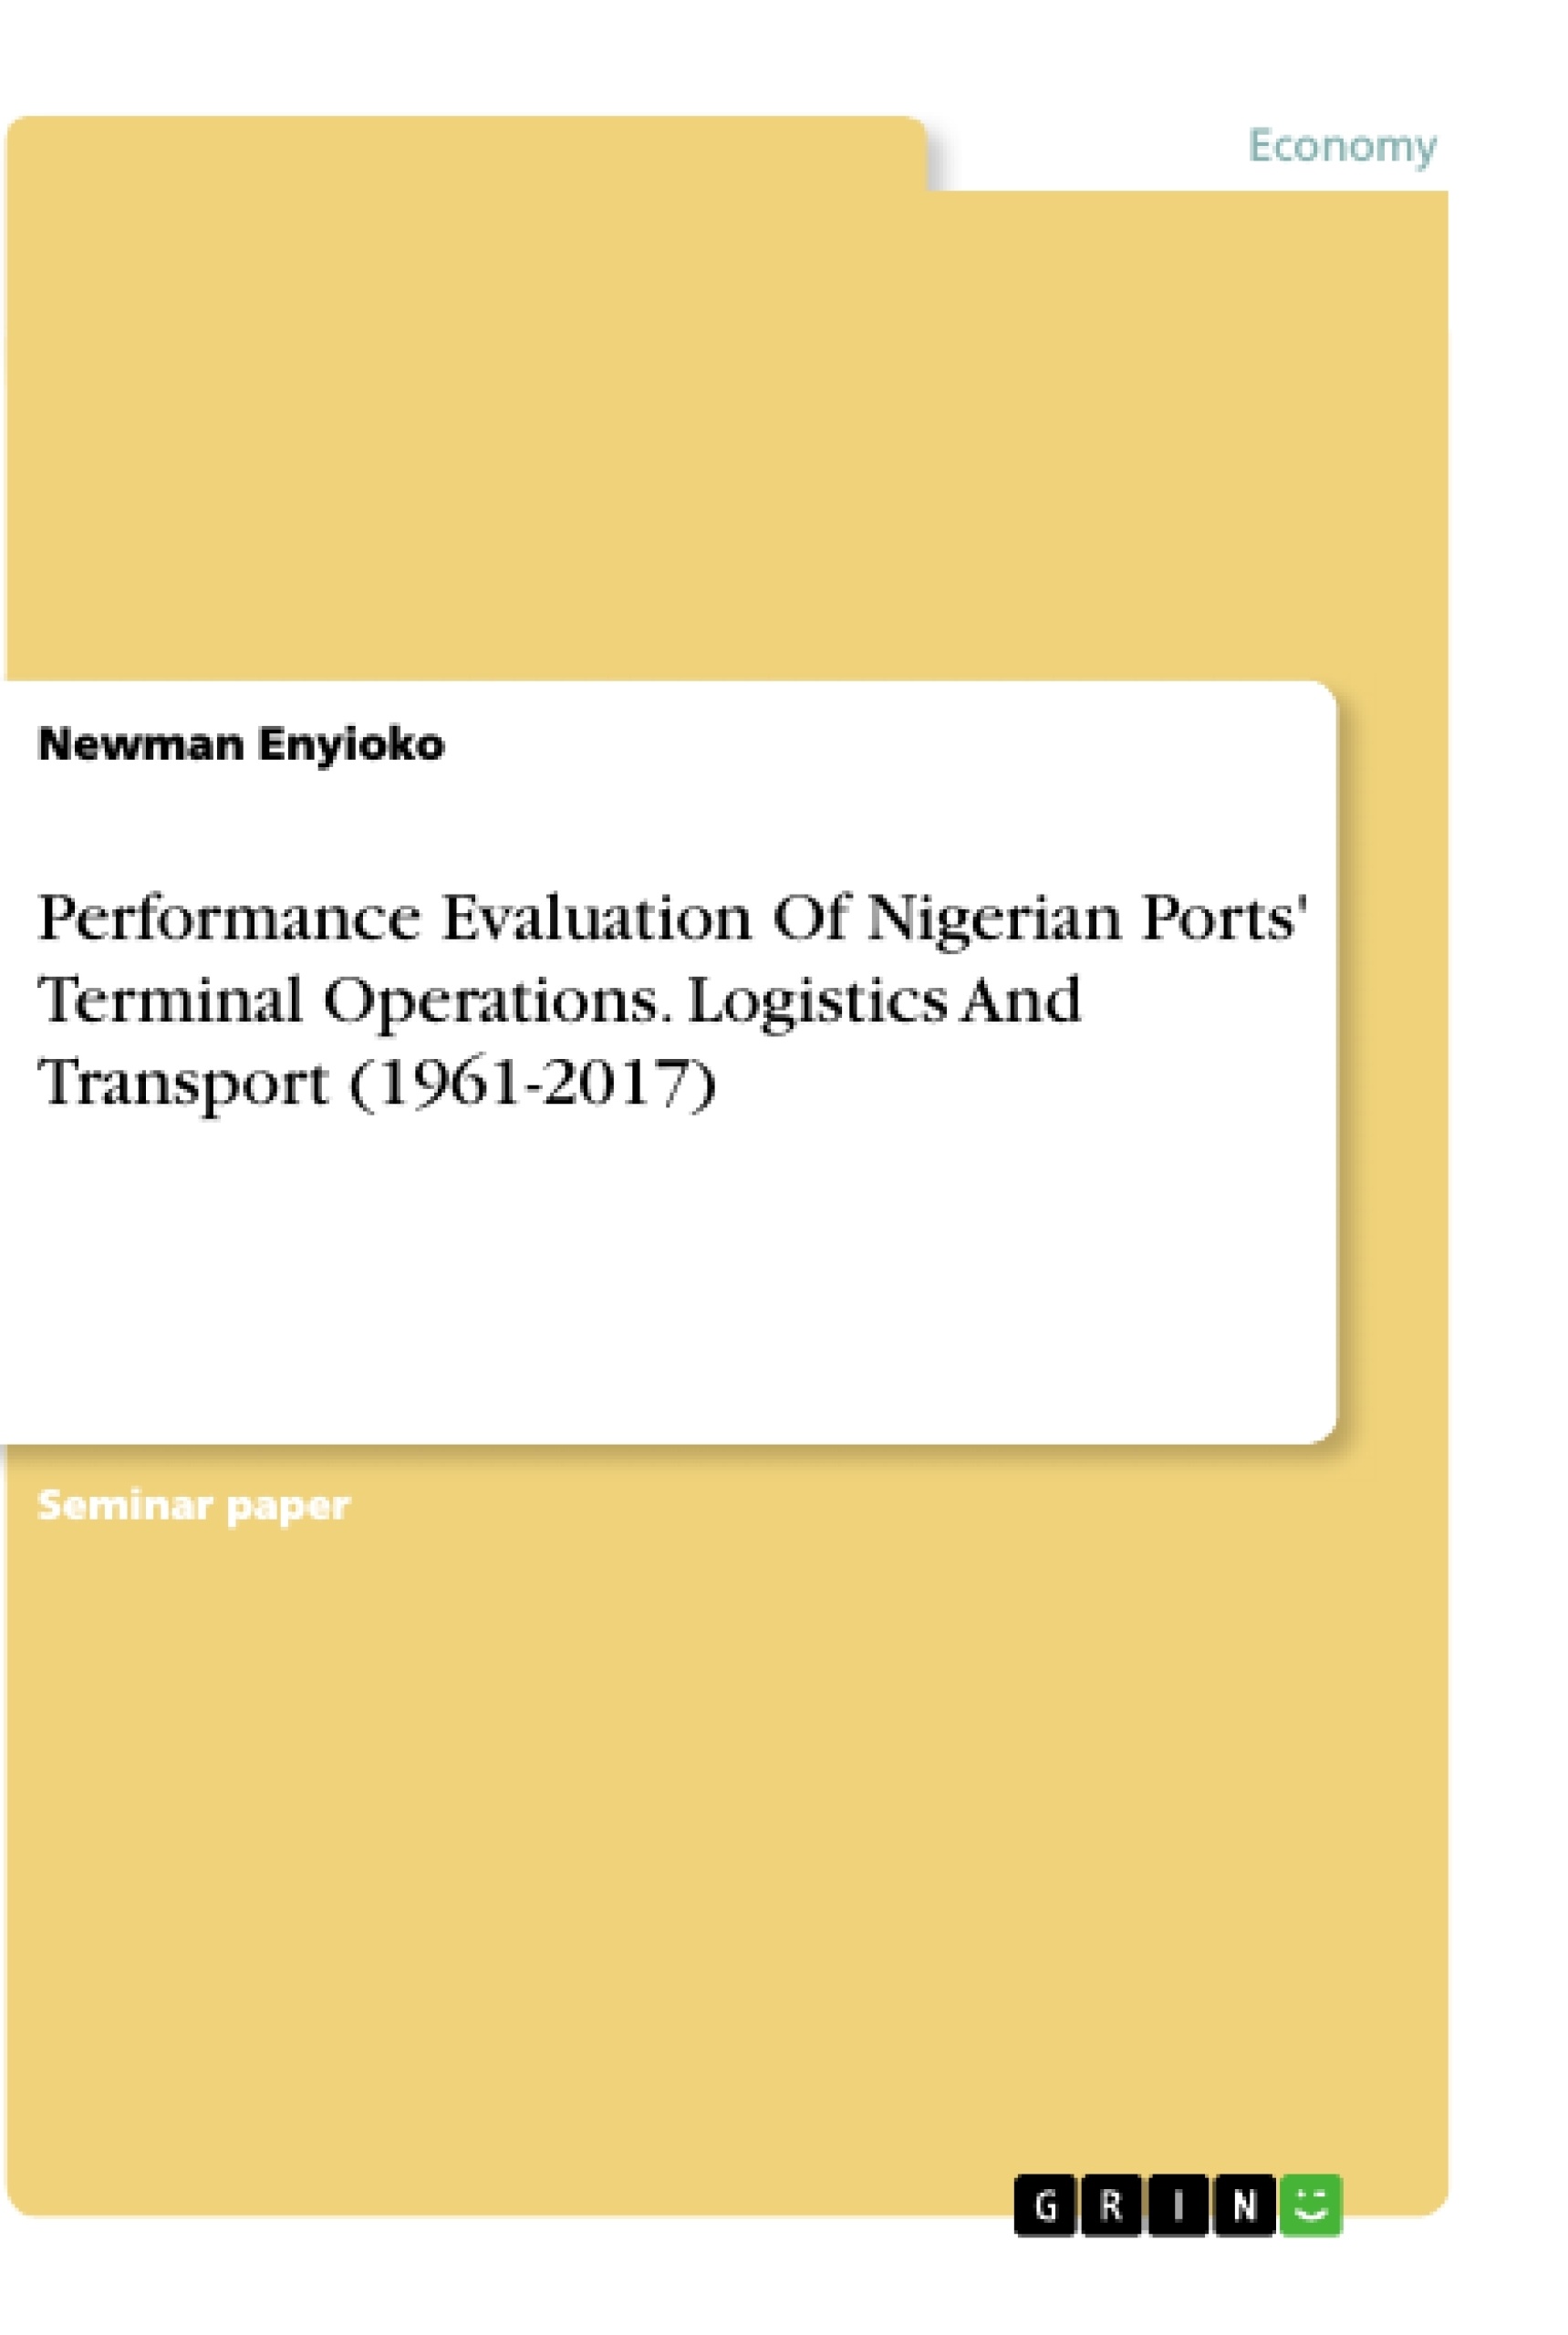 Titre: Performance Evaluation Of Nigerian Ports' Terminal Operations. Logistics And Transport (1961-2017)